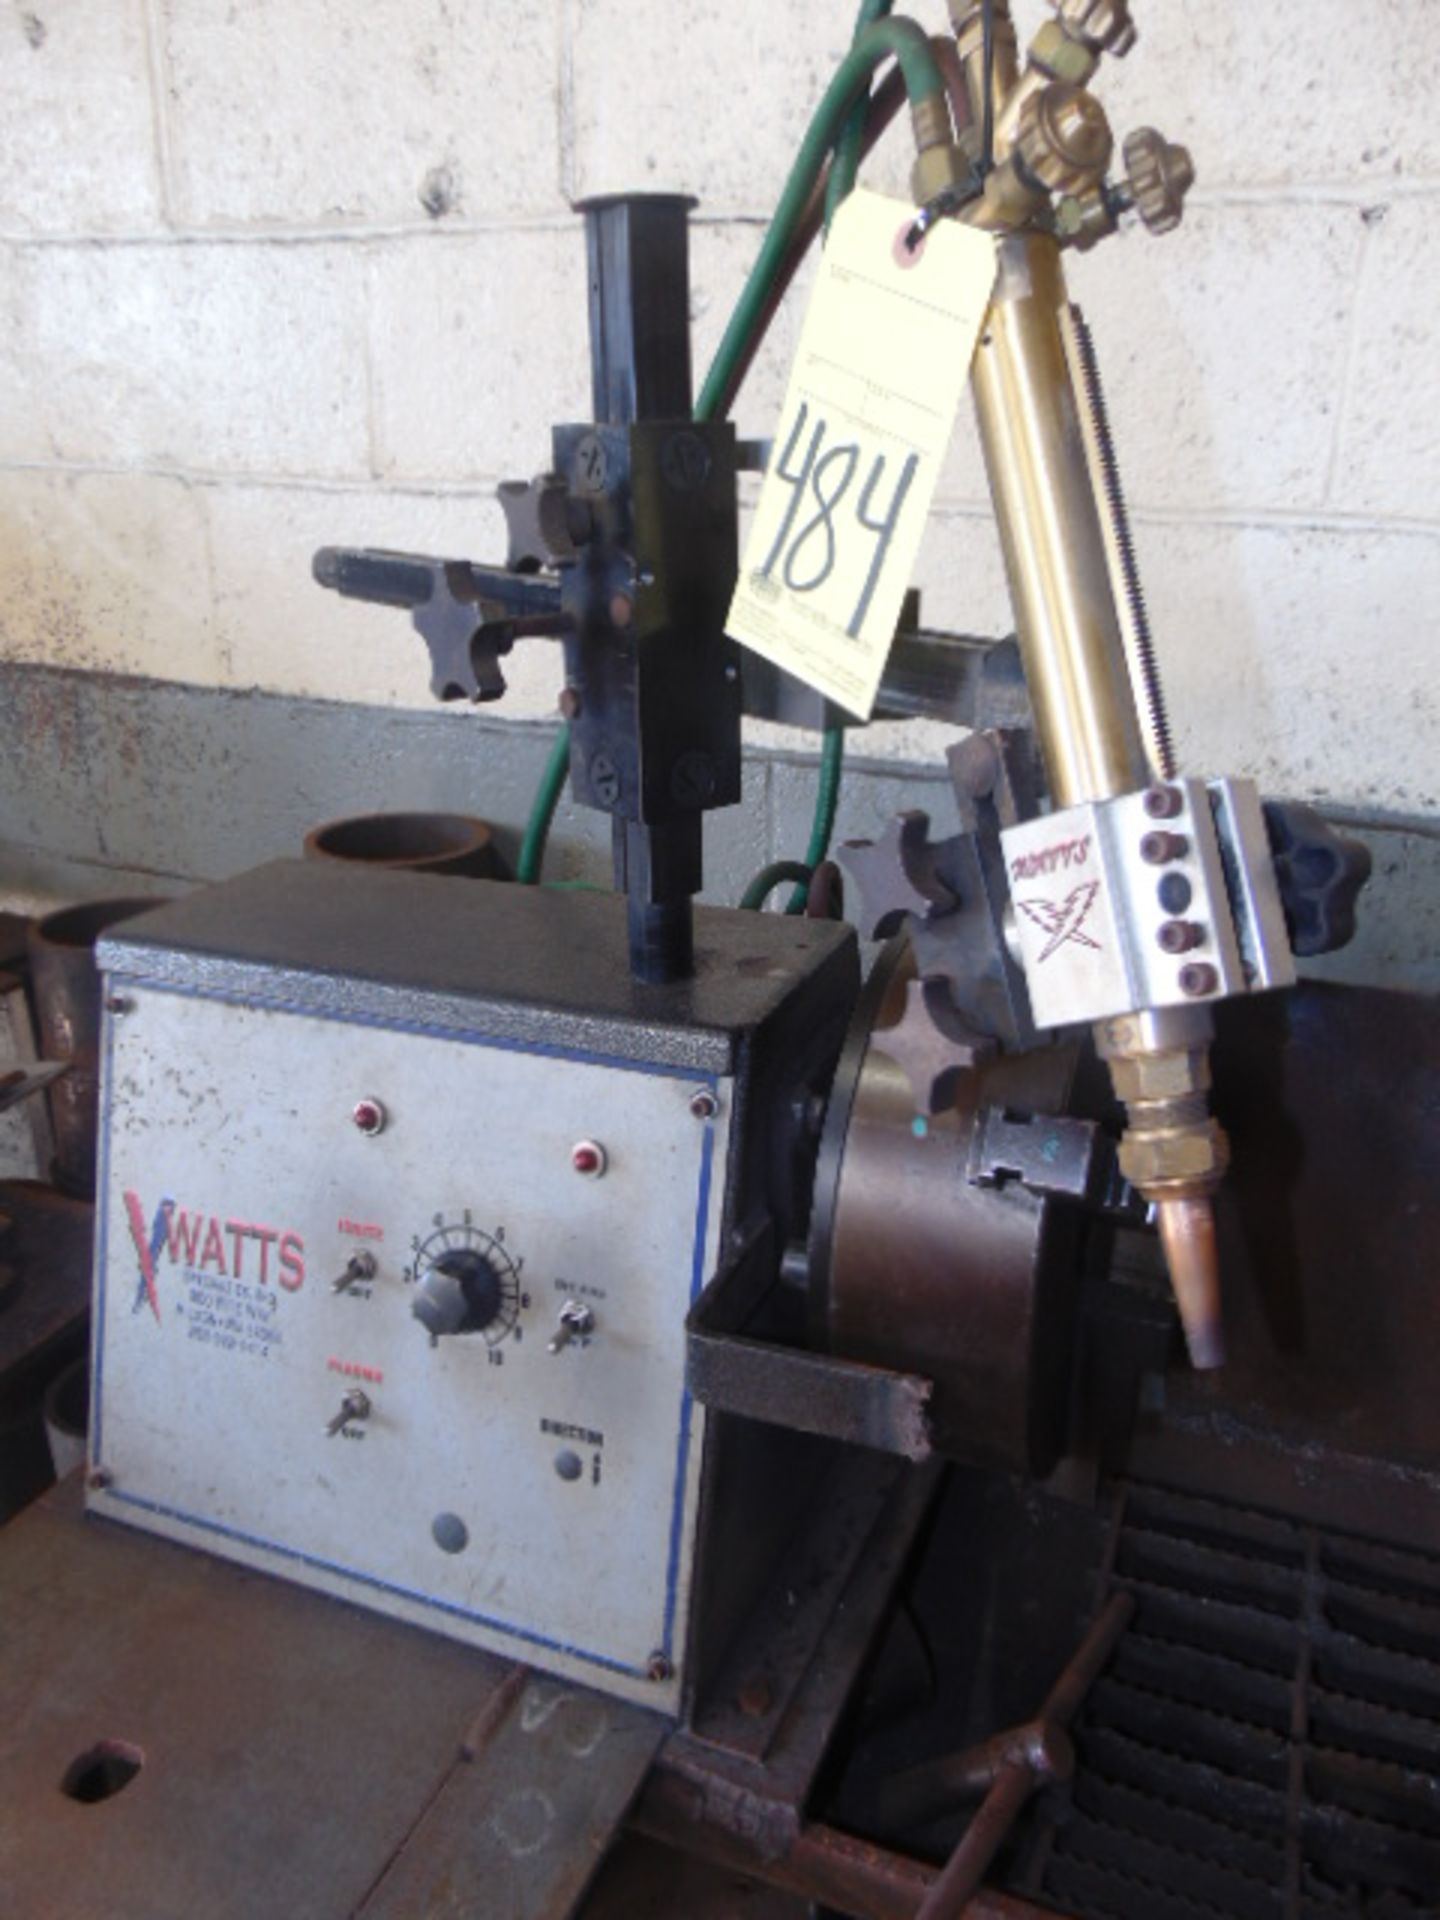 PIPE CUT-OFF MACHINE, WATTS SPECIALTIES, 12" variable spd. chuck, adj. oxy. fuel torch & - Image 2 of 2